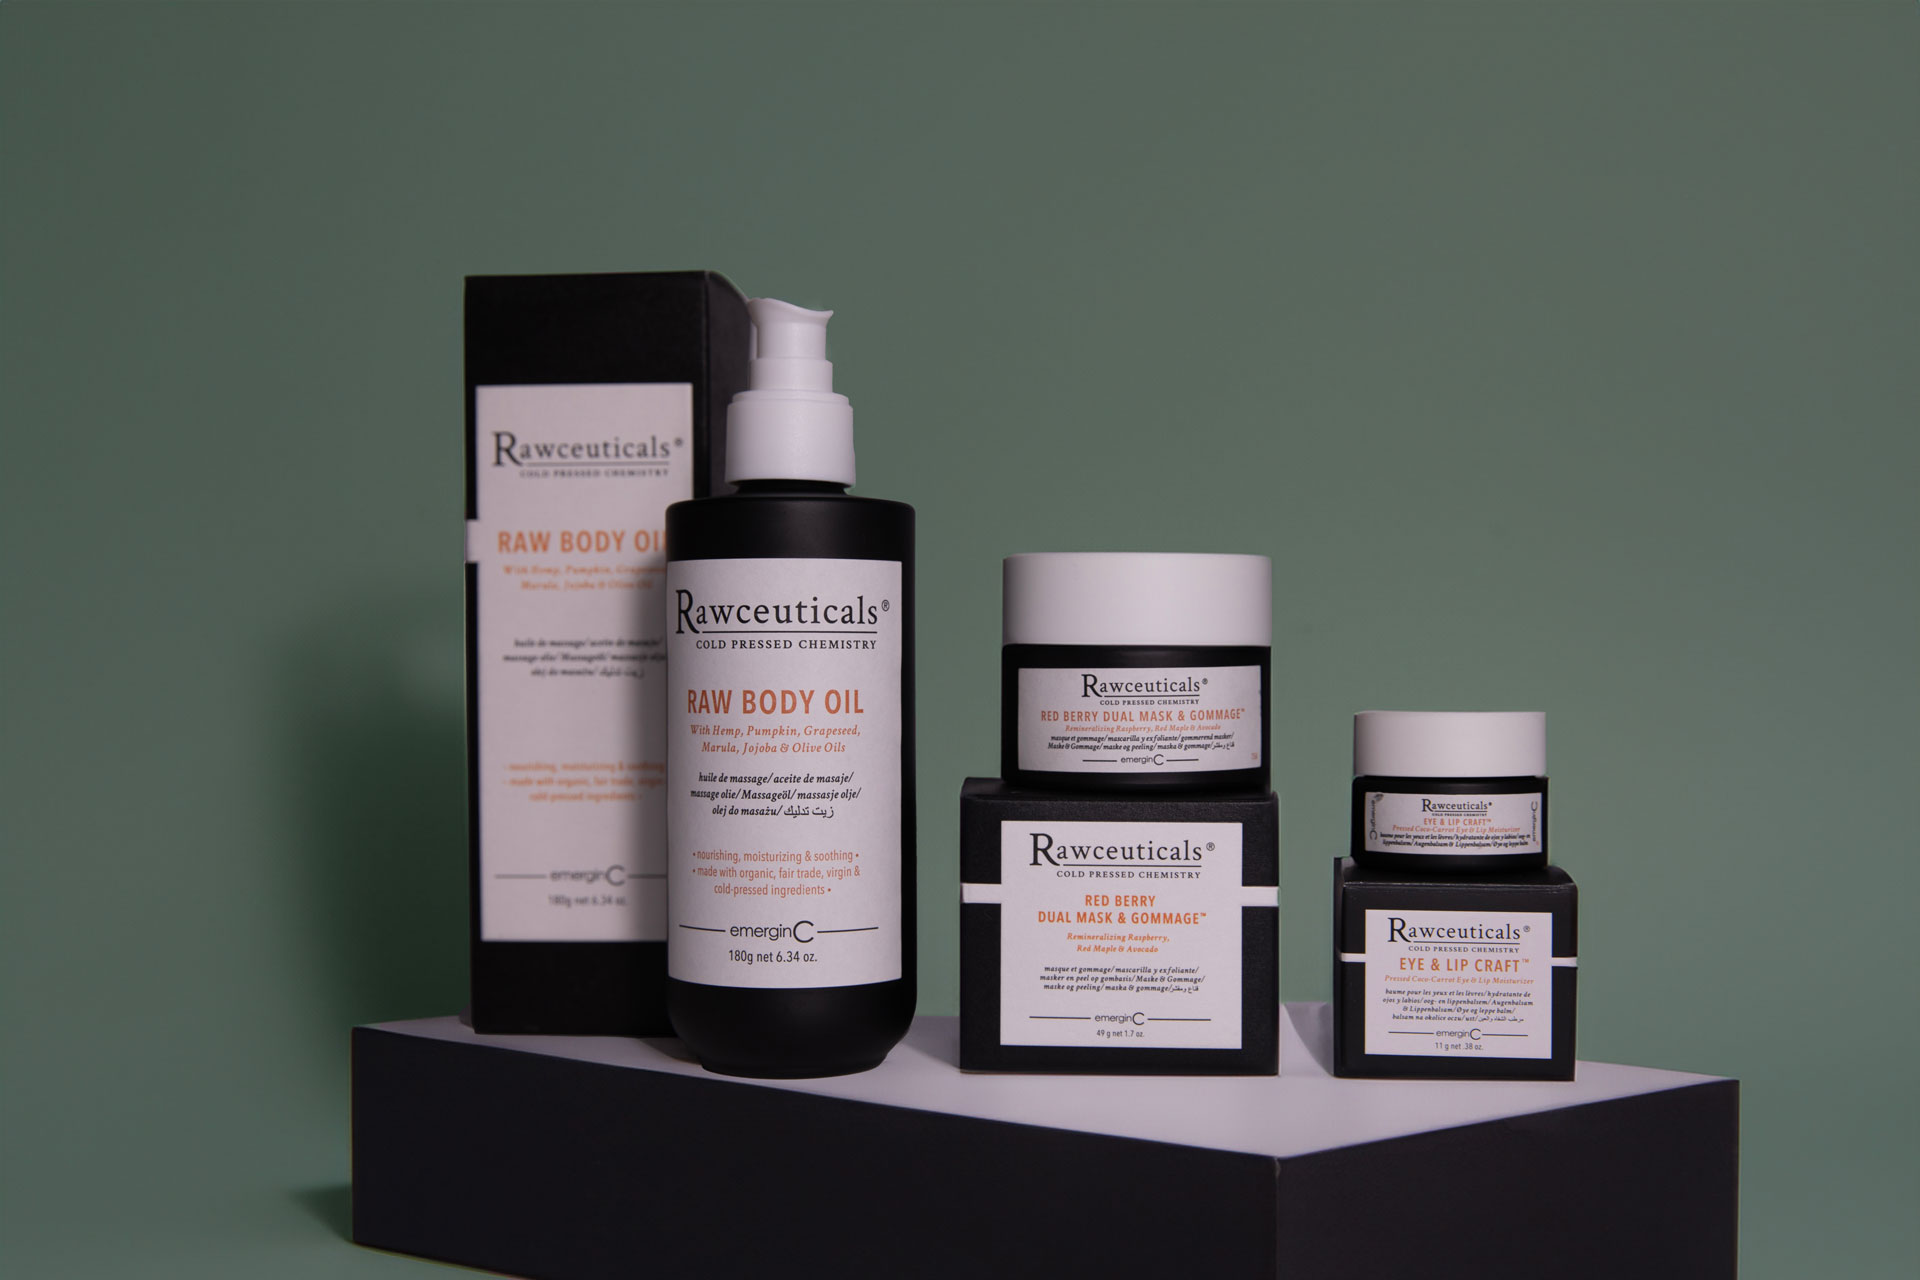 A collection of skincare products by rweceuticals, including bottles and jars on a black pedestal against a green background. the label shows "raw body oil" and other product names.